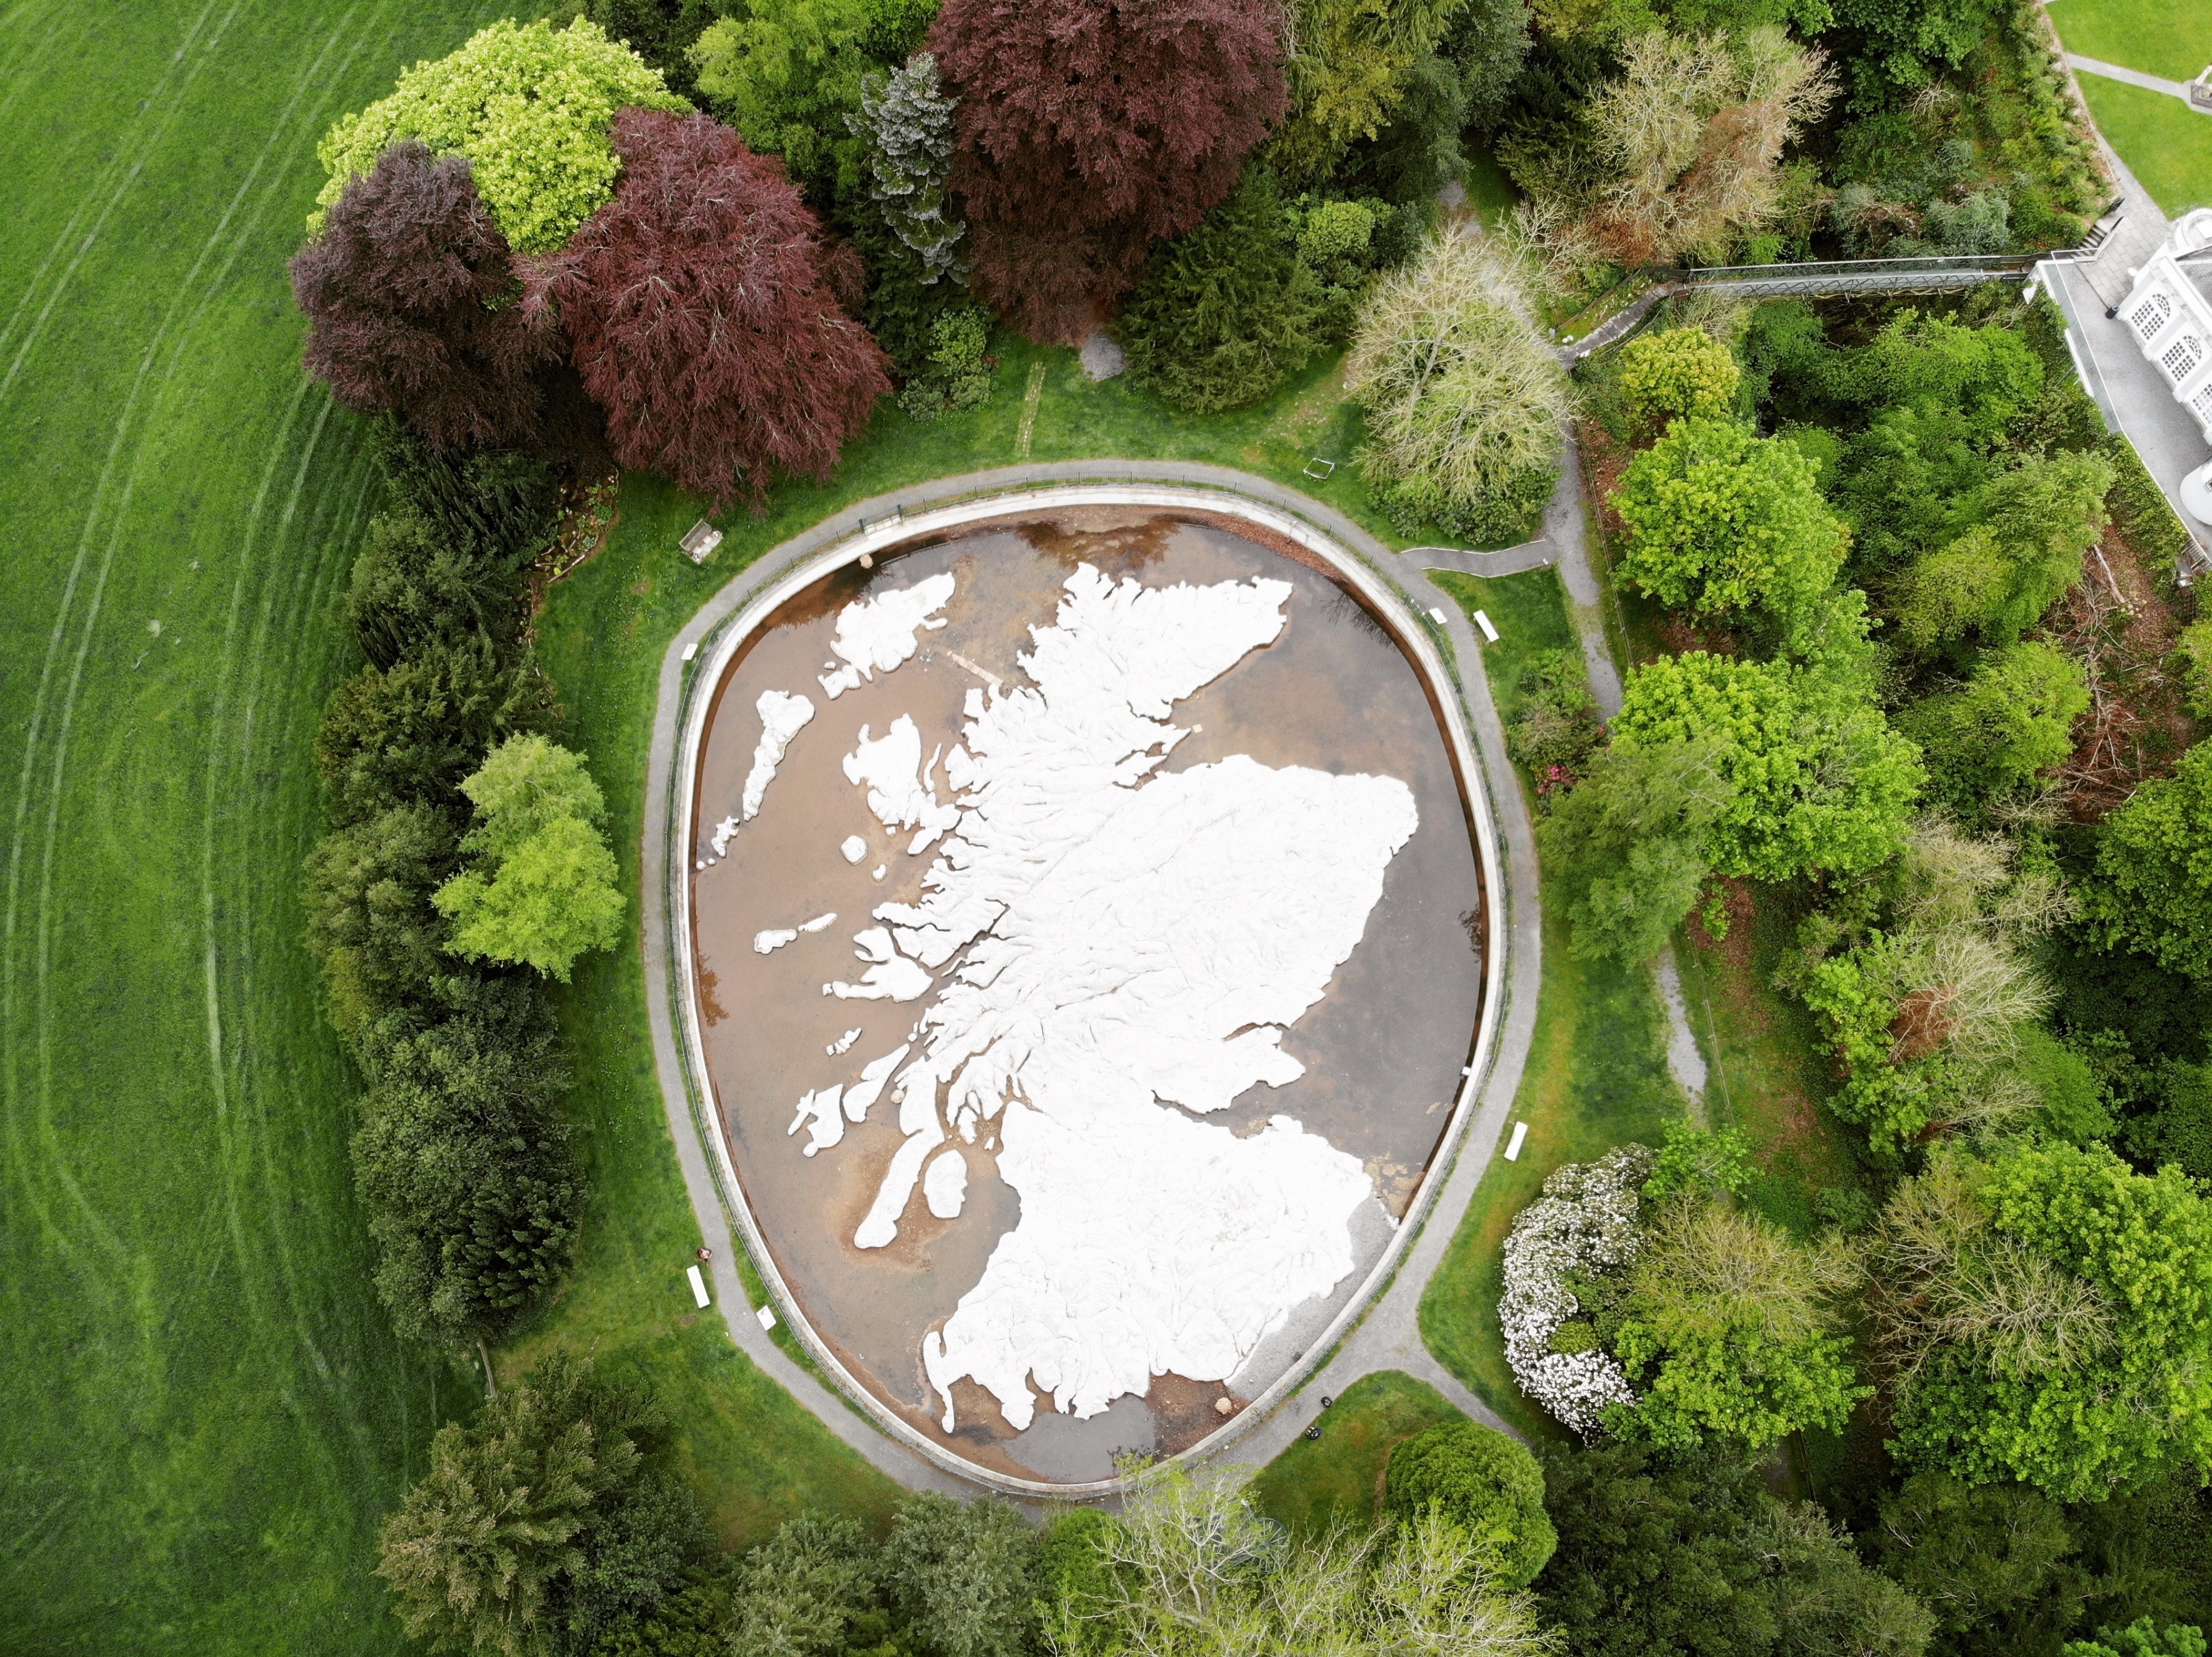 The Great Polish Map of Scotland was constructed by Polish veteran of WWII who had spent time in Scotland during the war. The map was constructed in the 1970s and is made of concrete.